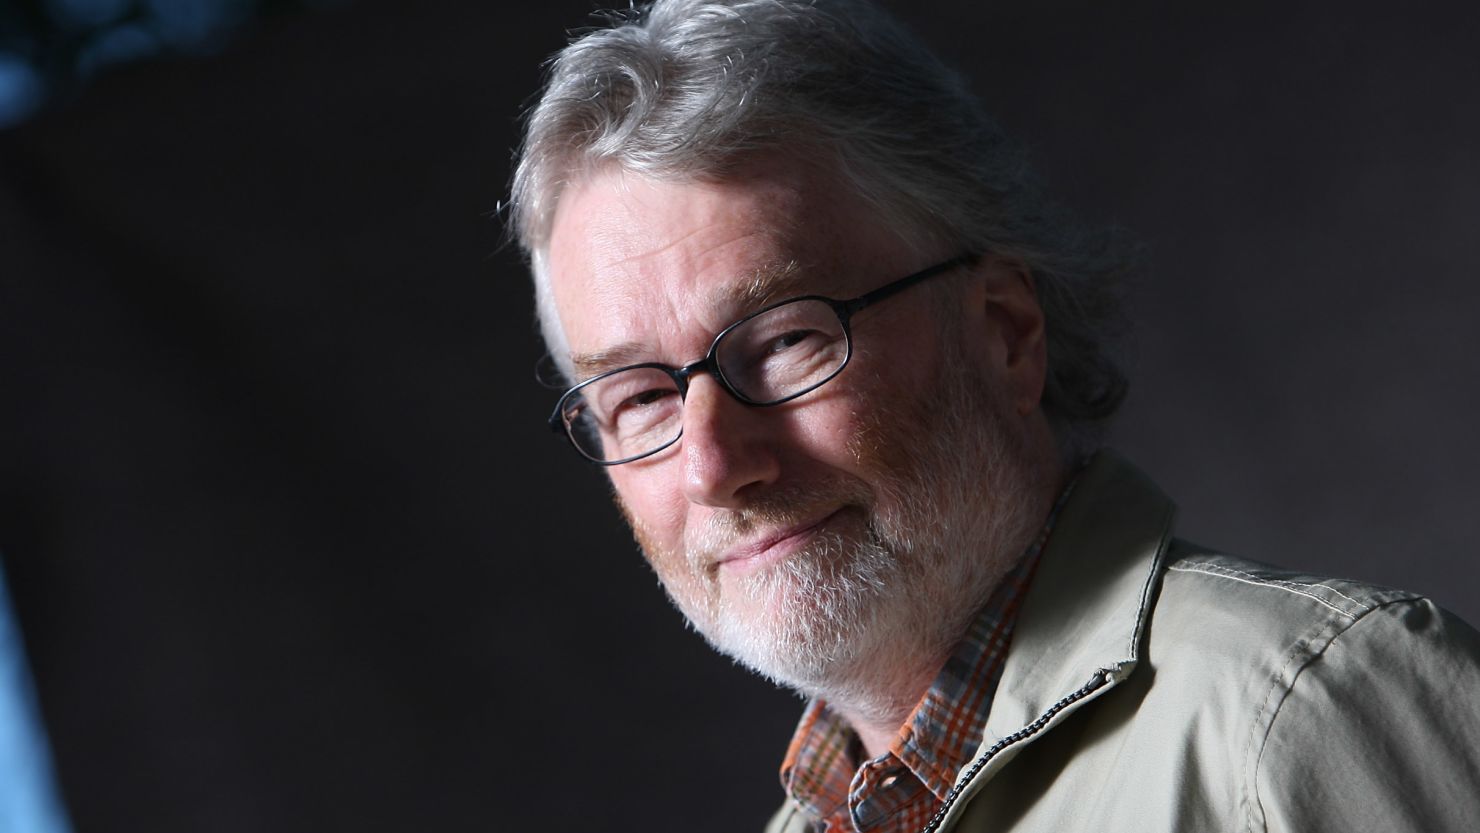 Iain Banks shows it's better to accept the facts of death